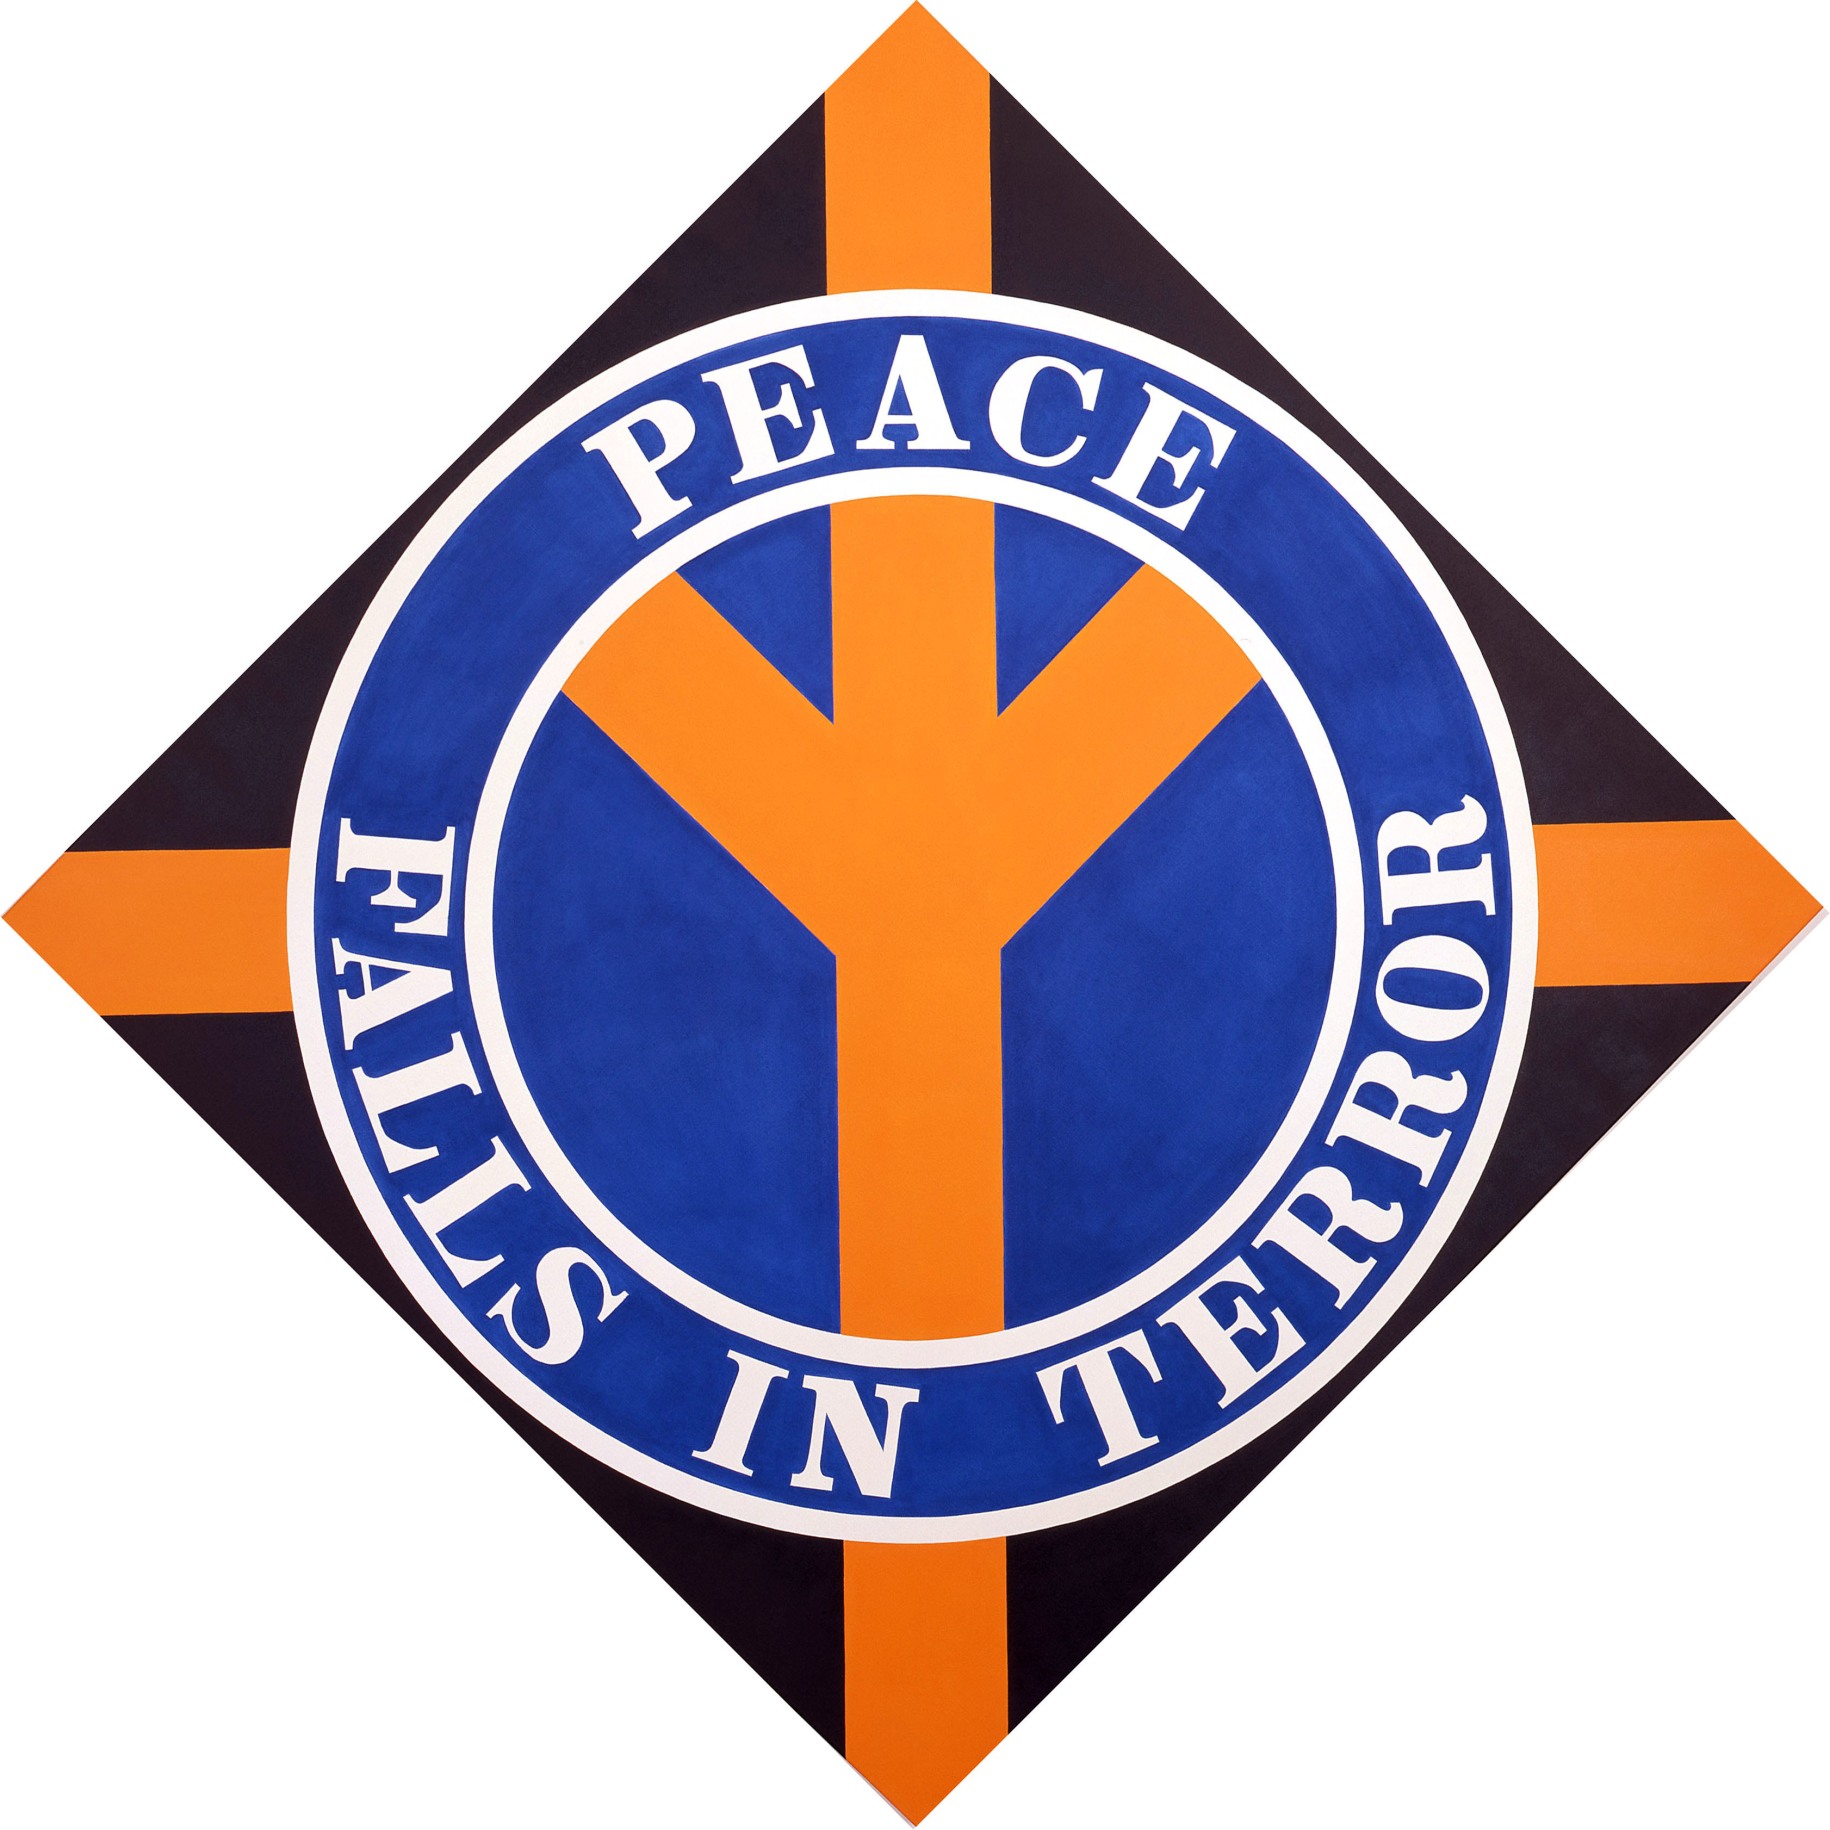 A 67 1/2 by 67 1/2 inch diamond shaped black painting with an upside down orange peace sign in a blue circle. The ring around the circle is blue with white outlines. In it the work's title, &quot;Peace Falls in Terror,&quot; is painted in white letters. &quot;Peace&quot; appears on the top half, and &quot;Falls in Terror&quot; appears on the bottom half. Orange rectangular bands of paint go from the outer edge of the circle to each corner of the triangle.